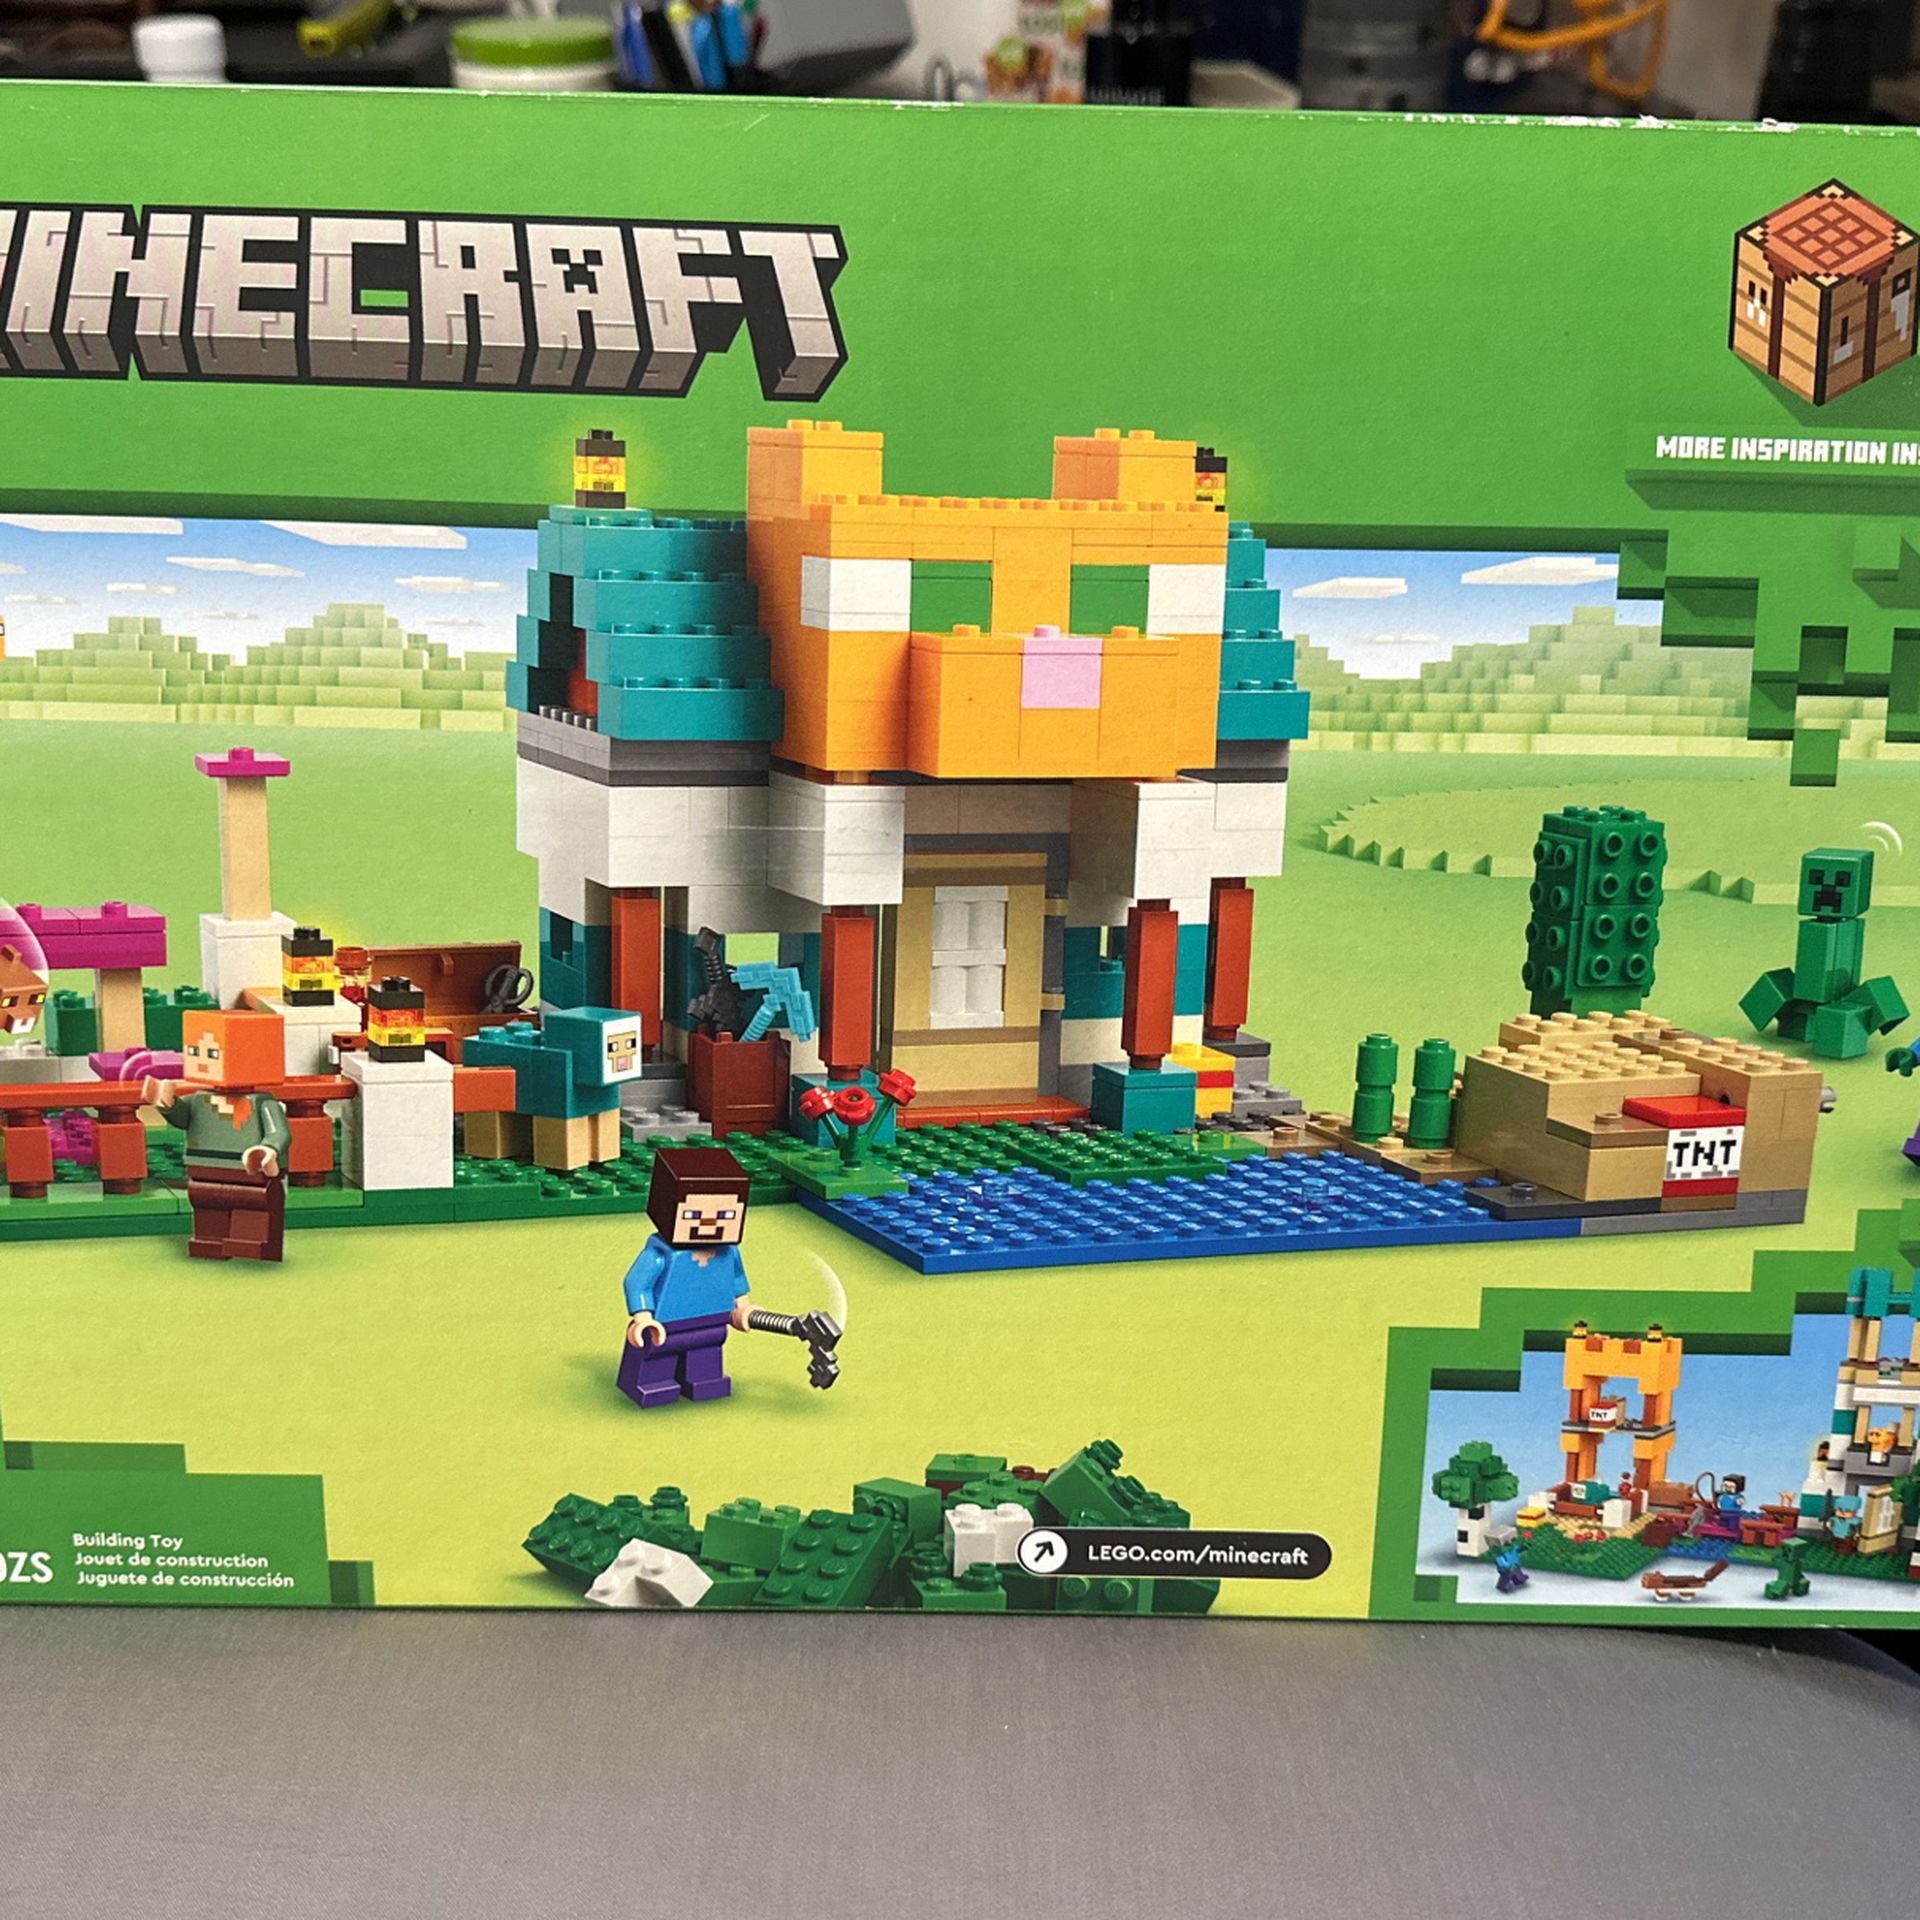 Lego Minecraft 21249 The Crafting Box 4.0 for Sale in San Diego, CA -  OfferUp